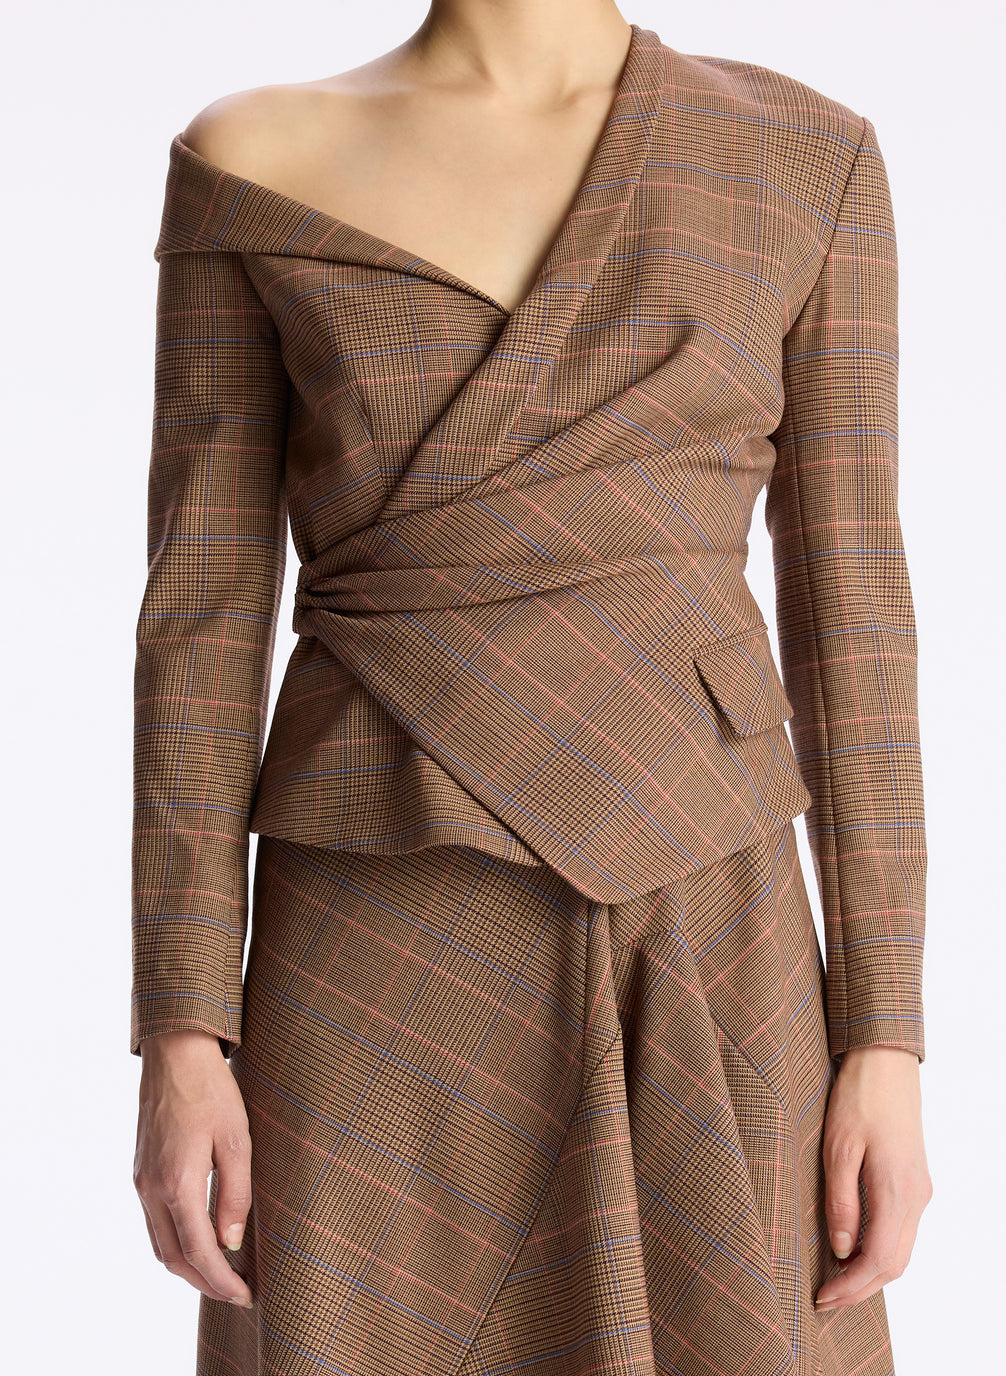 detail view of woman wearing brown plaid asymmetric long sleeve top and matching brown plaid midi skirt